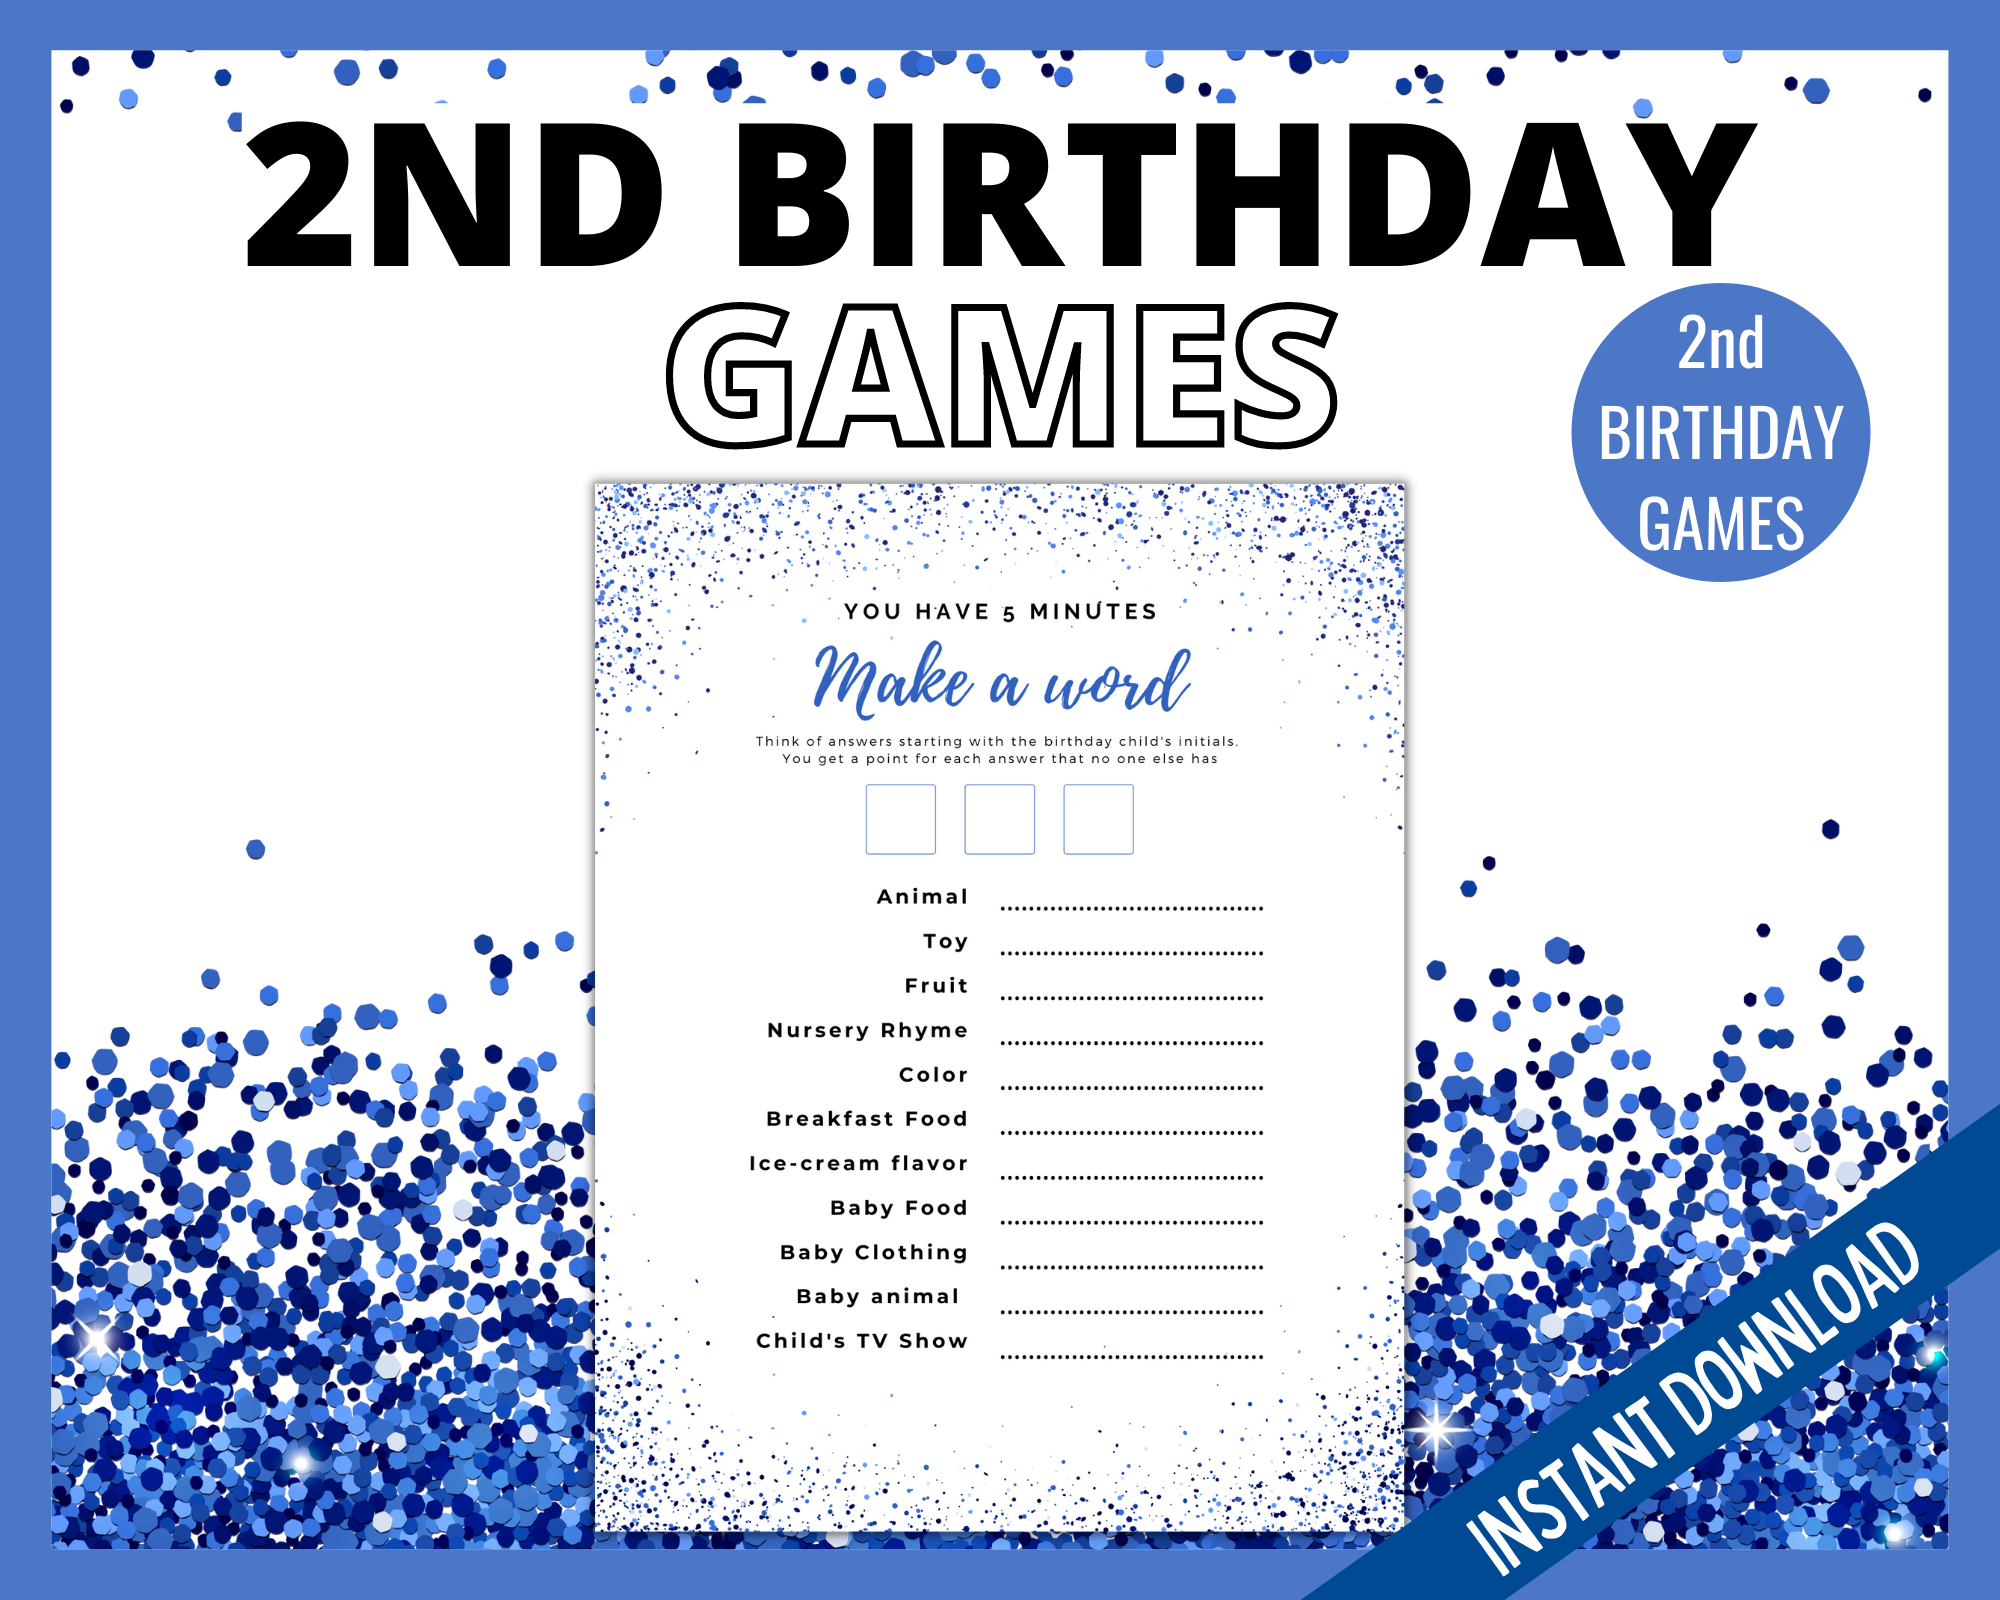 Kids Birthday Party: Games, Food and Fun.